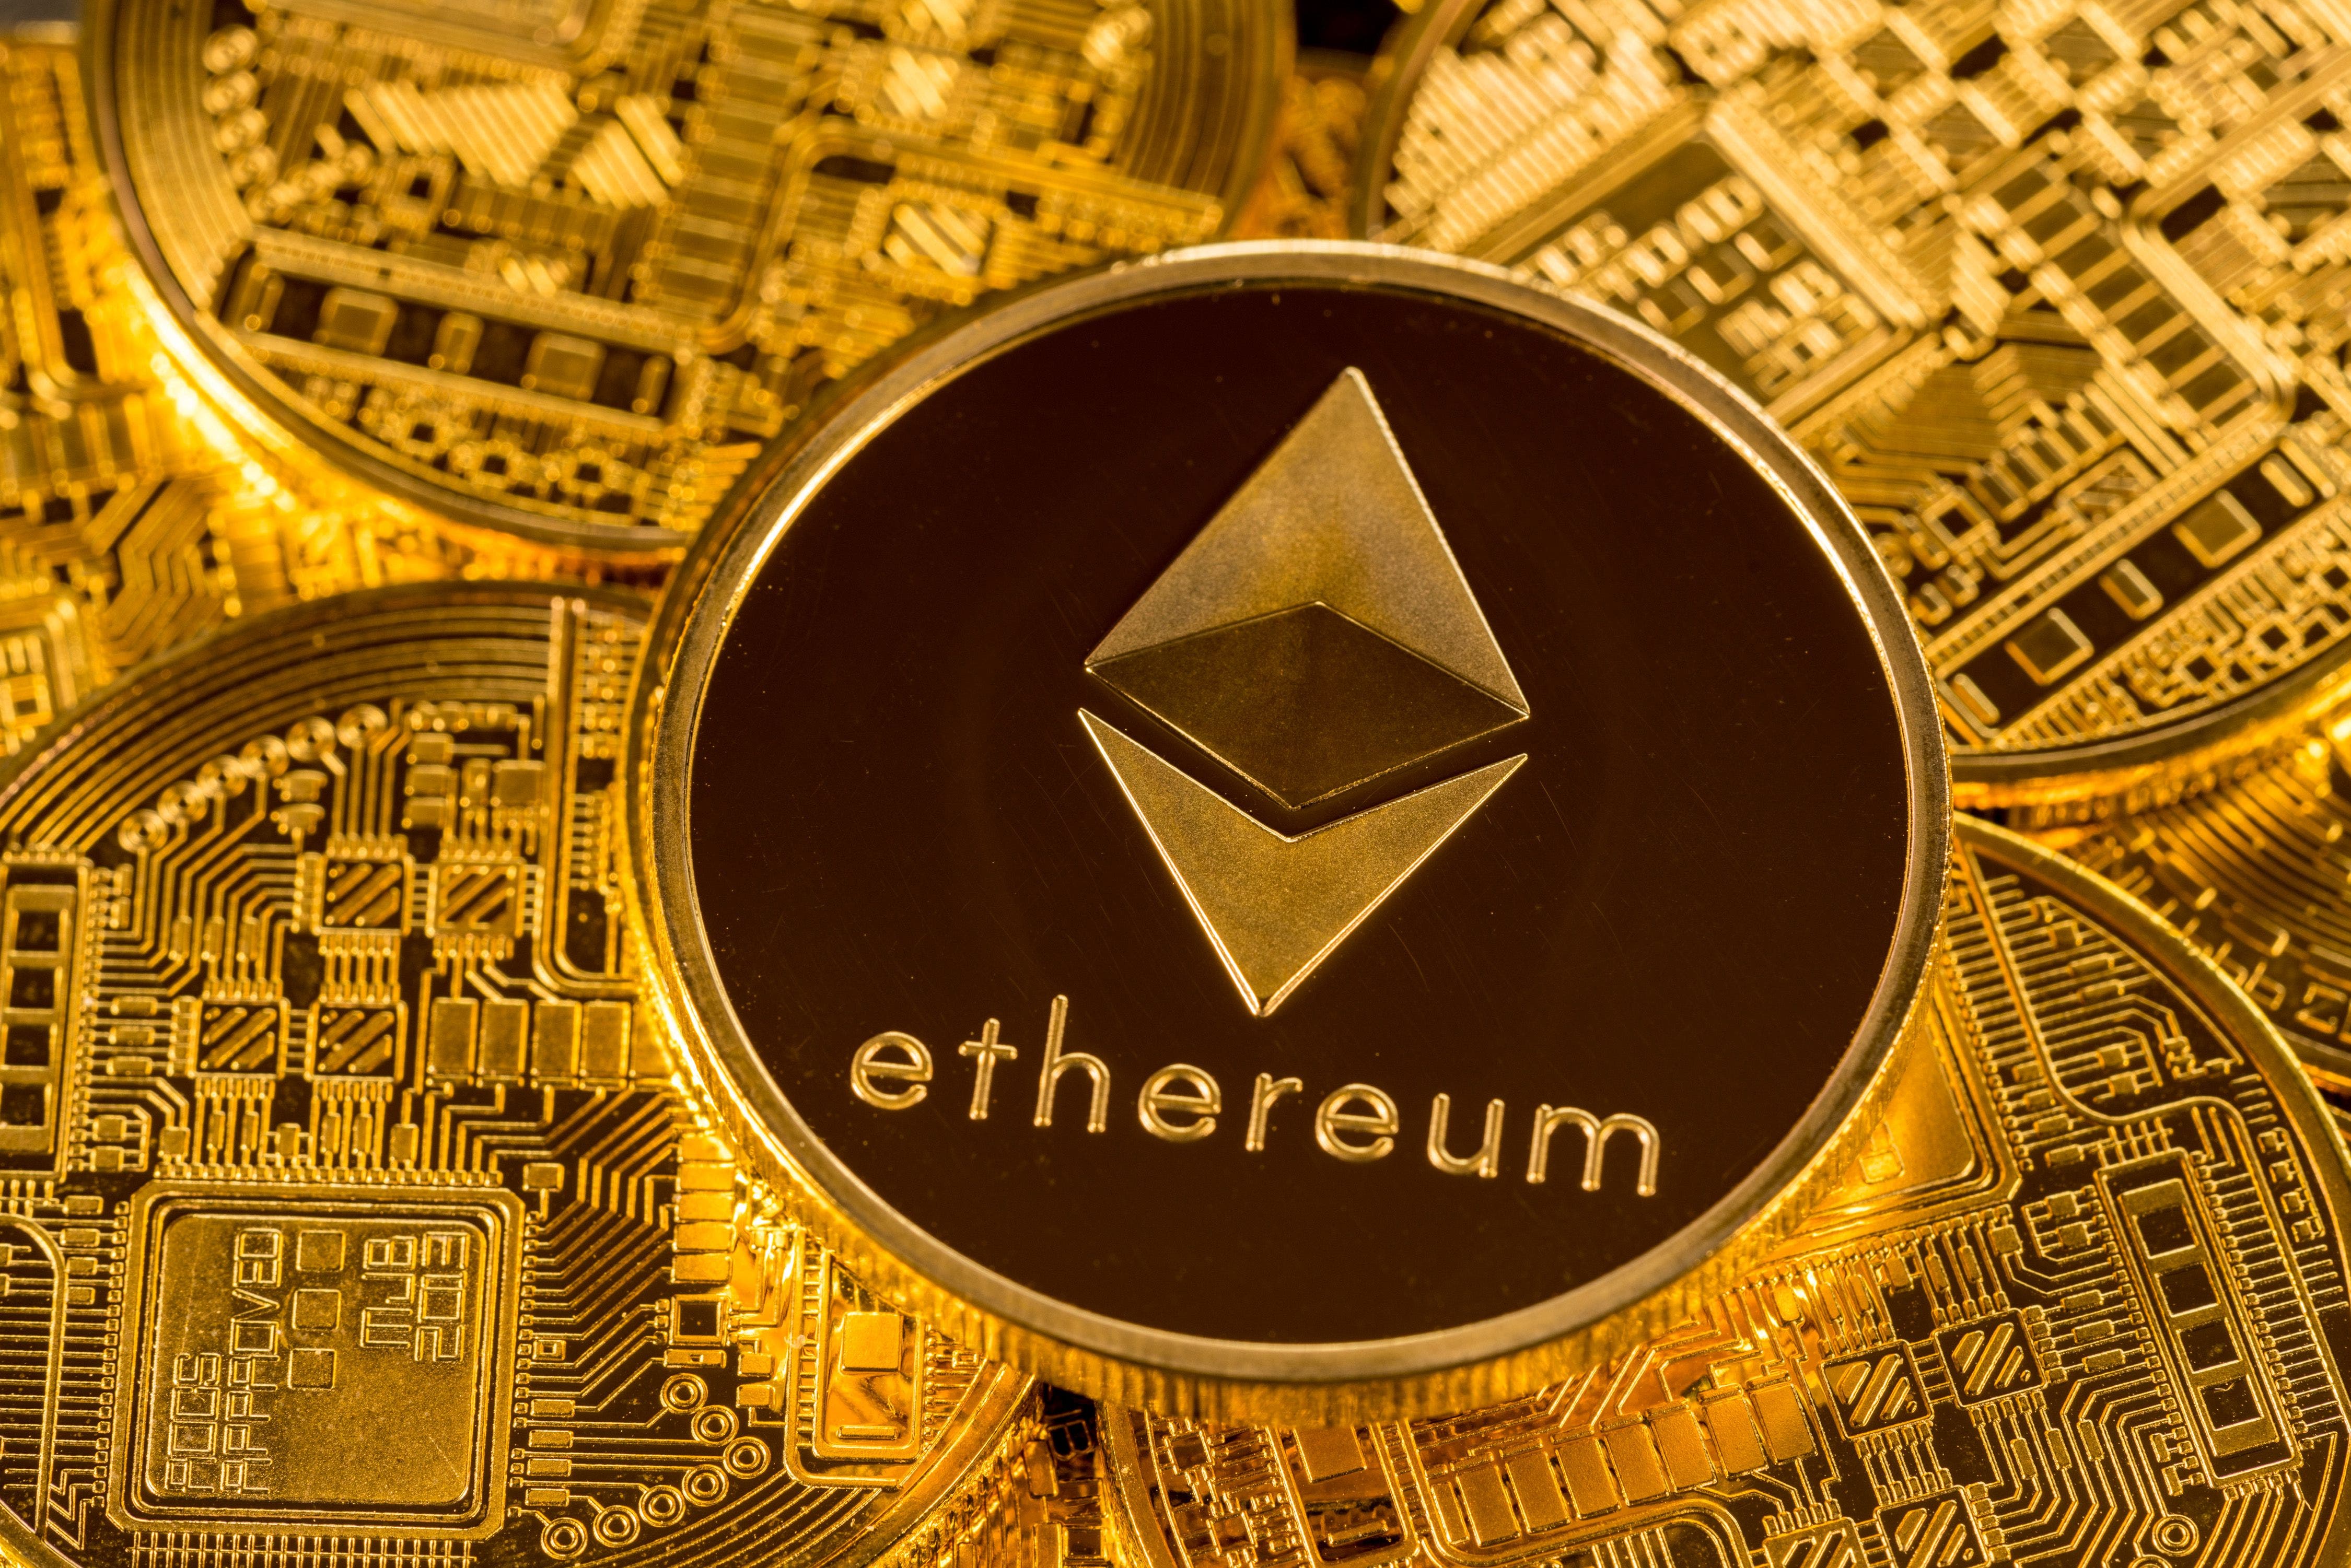 Ethereum Falls But Remains Above This Key Level; Neutrino USD, Dogecoin Among Top Gainers